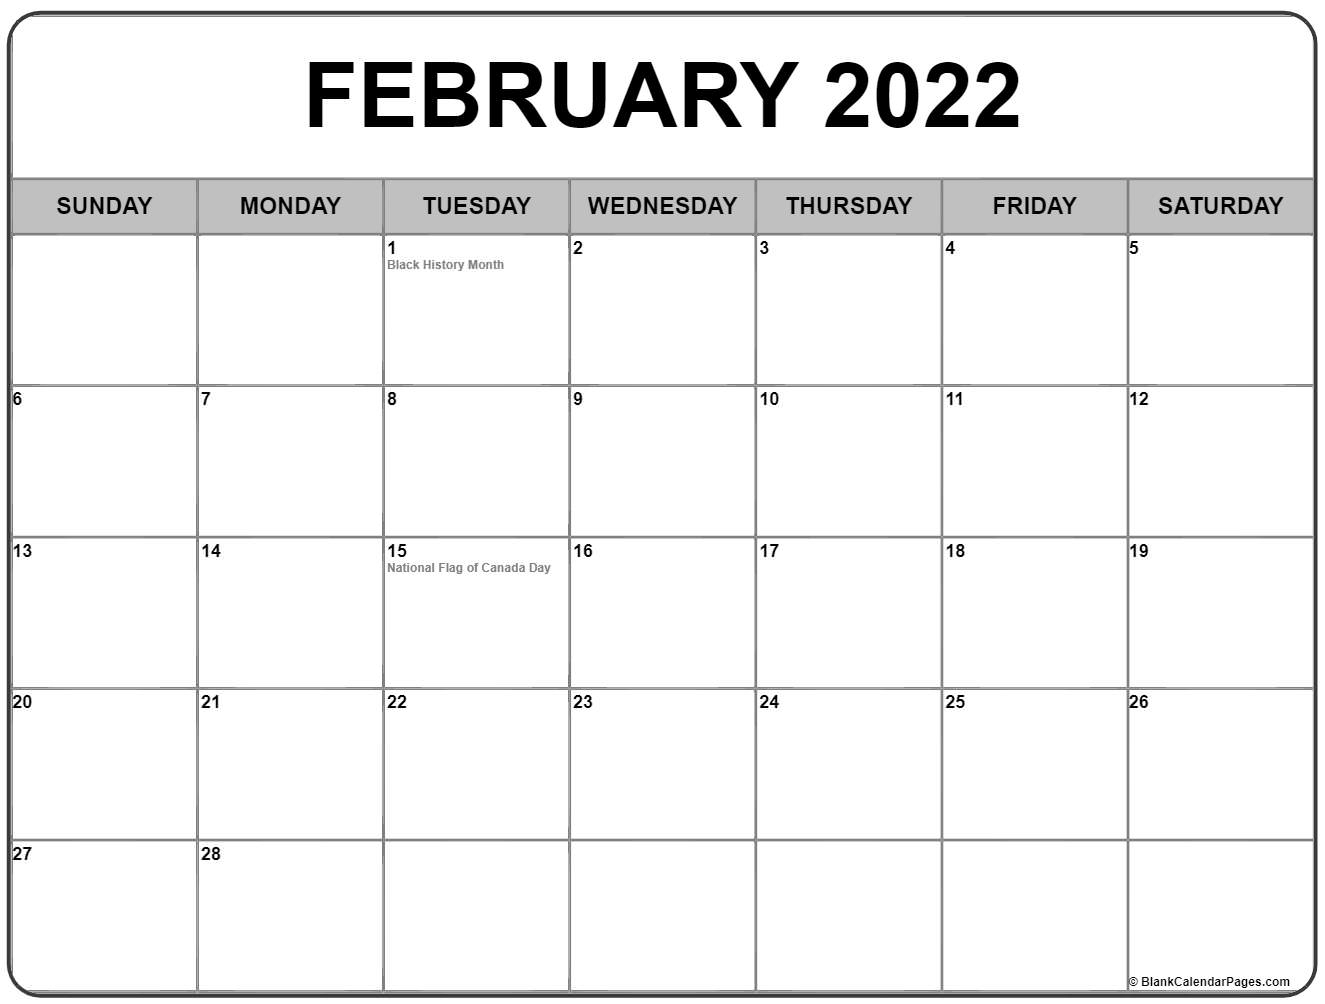 Collect February 2022 Calendar Events